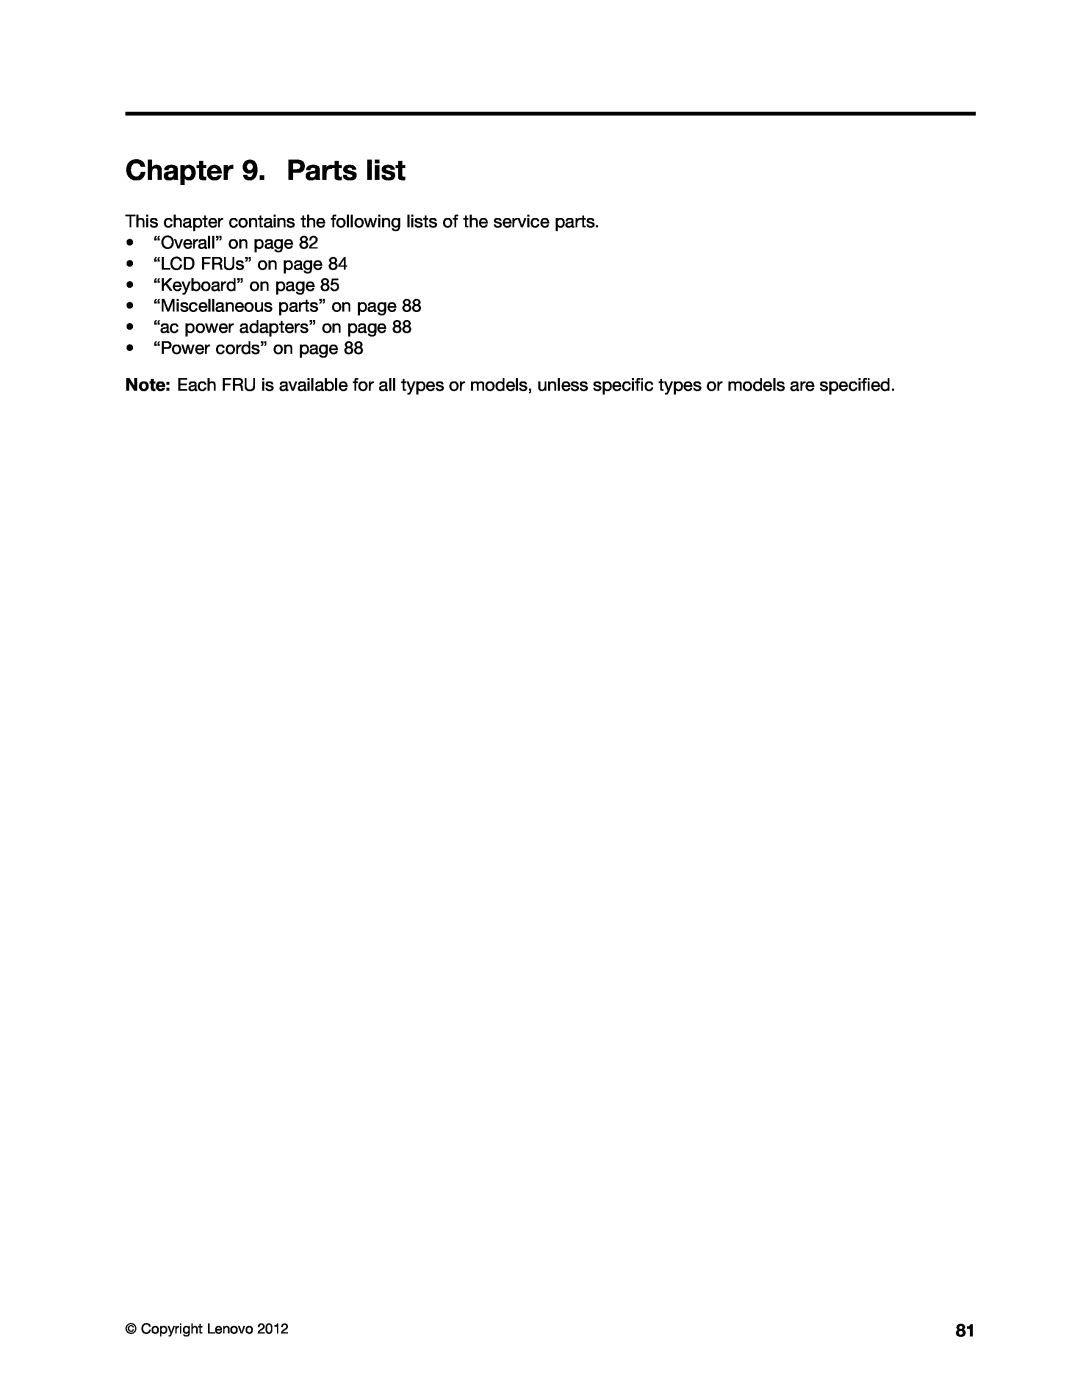 Lenovo B575E manual Parts list, This chapter contains the following lists of the service parts, “Power cords” on page 